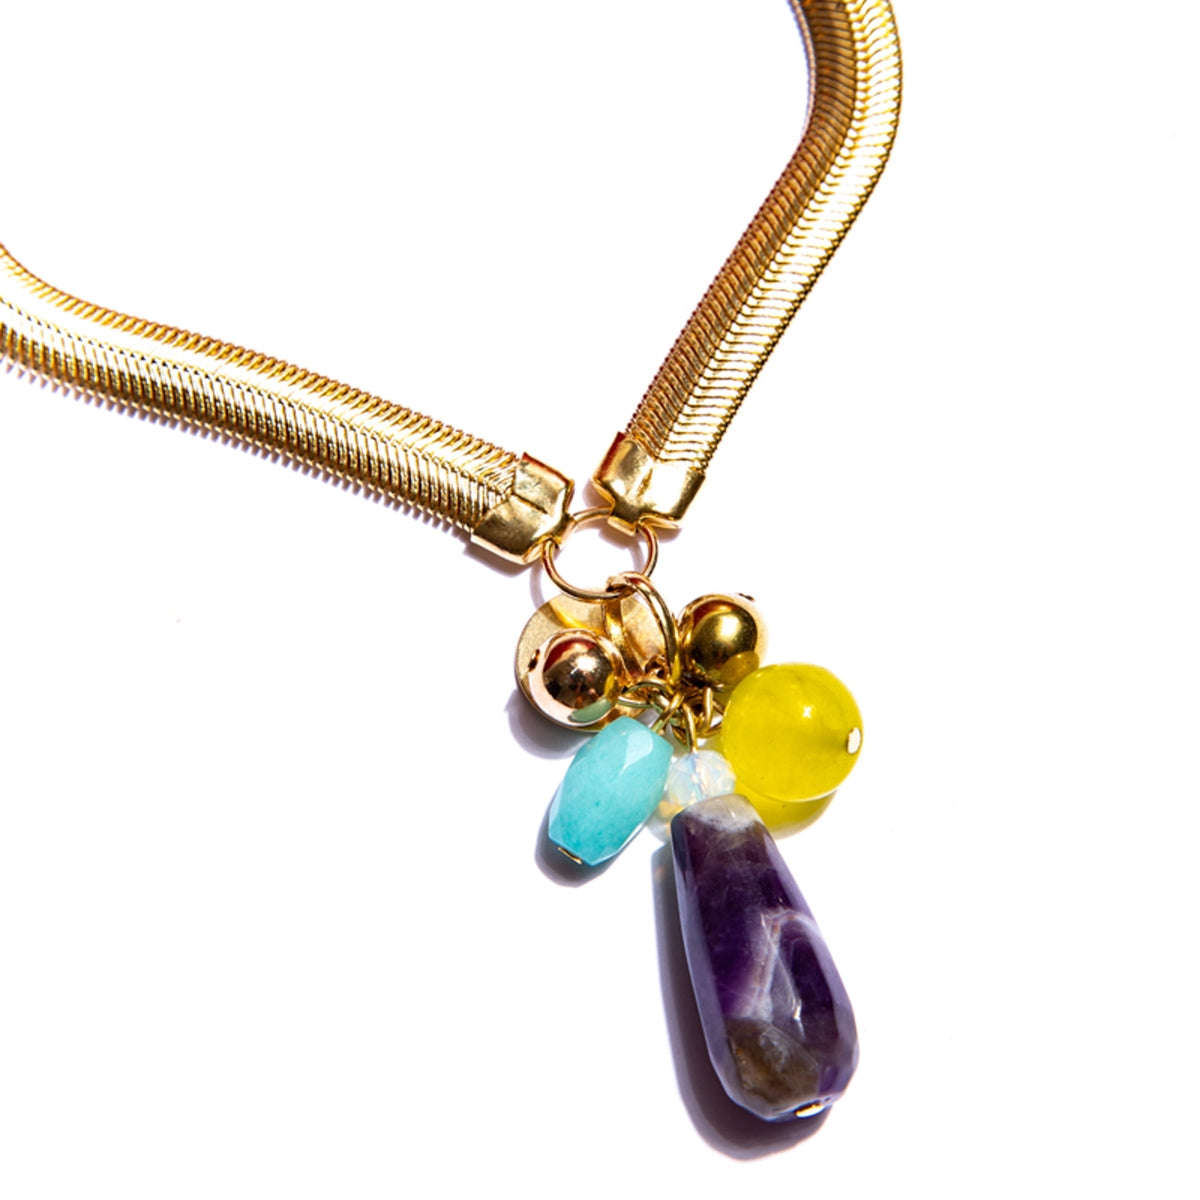 Short Amethyst necklace, natural stones, crystals, and gold-plated metals